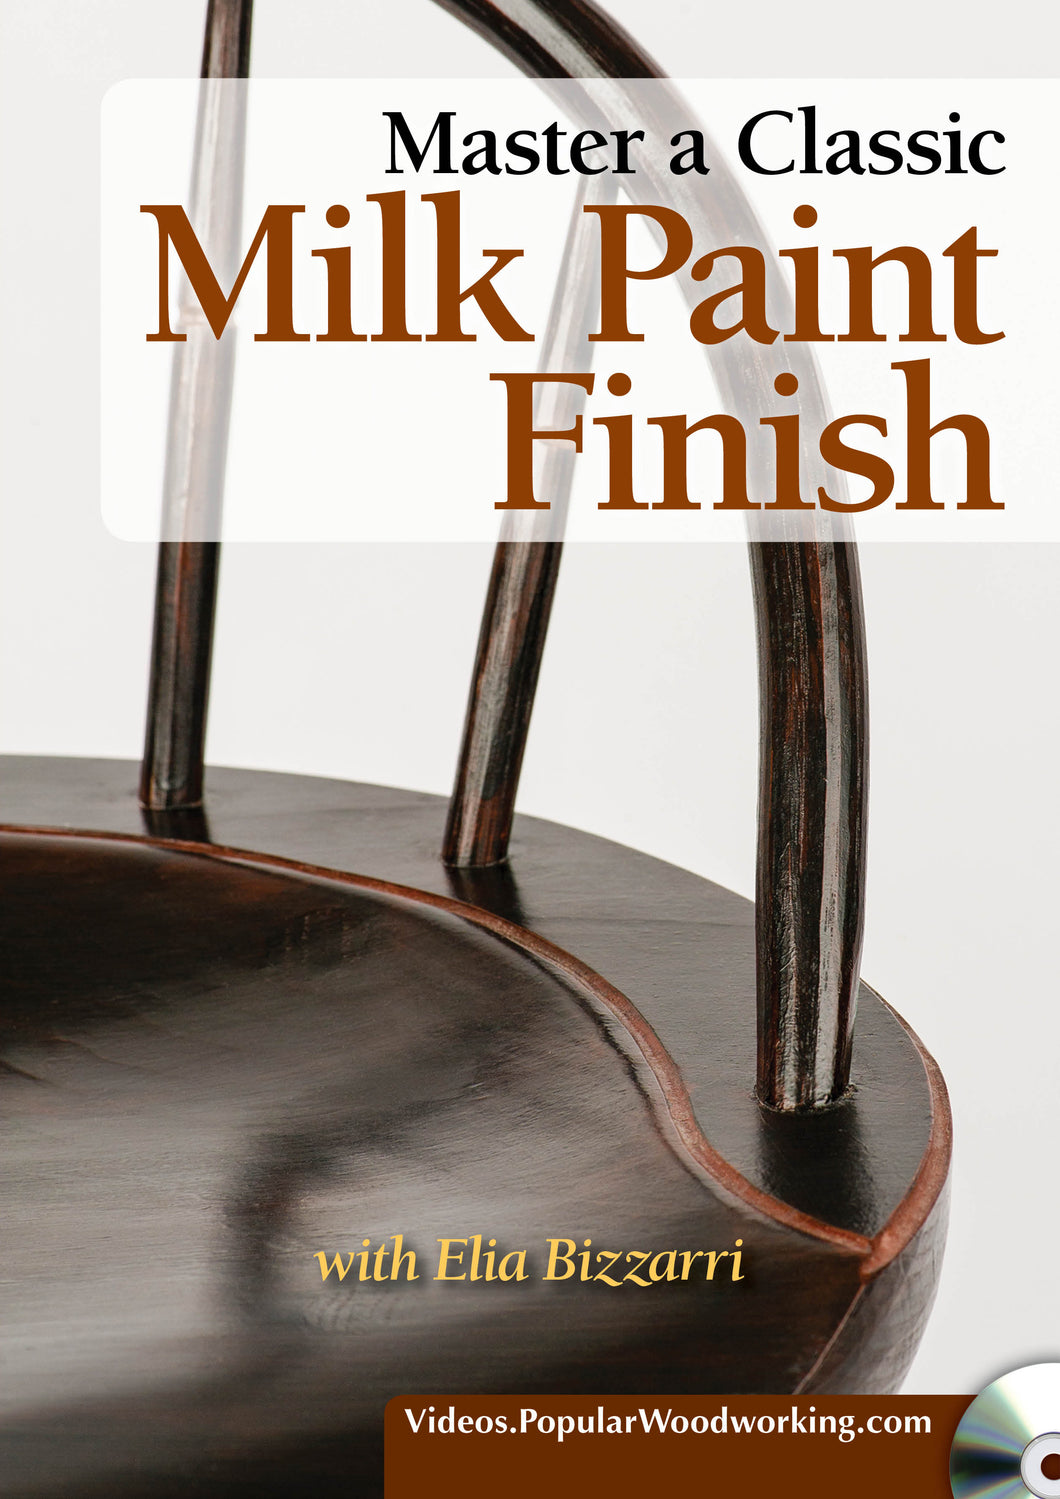 Master a Classic Milk Paint Finish Video Download